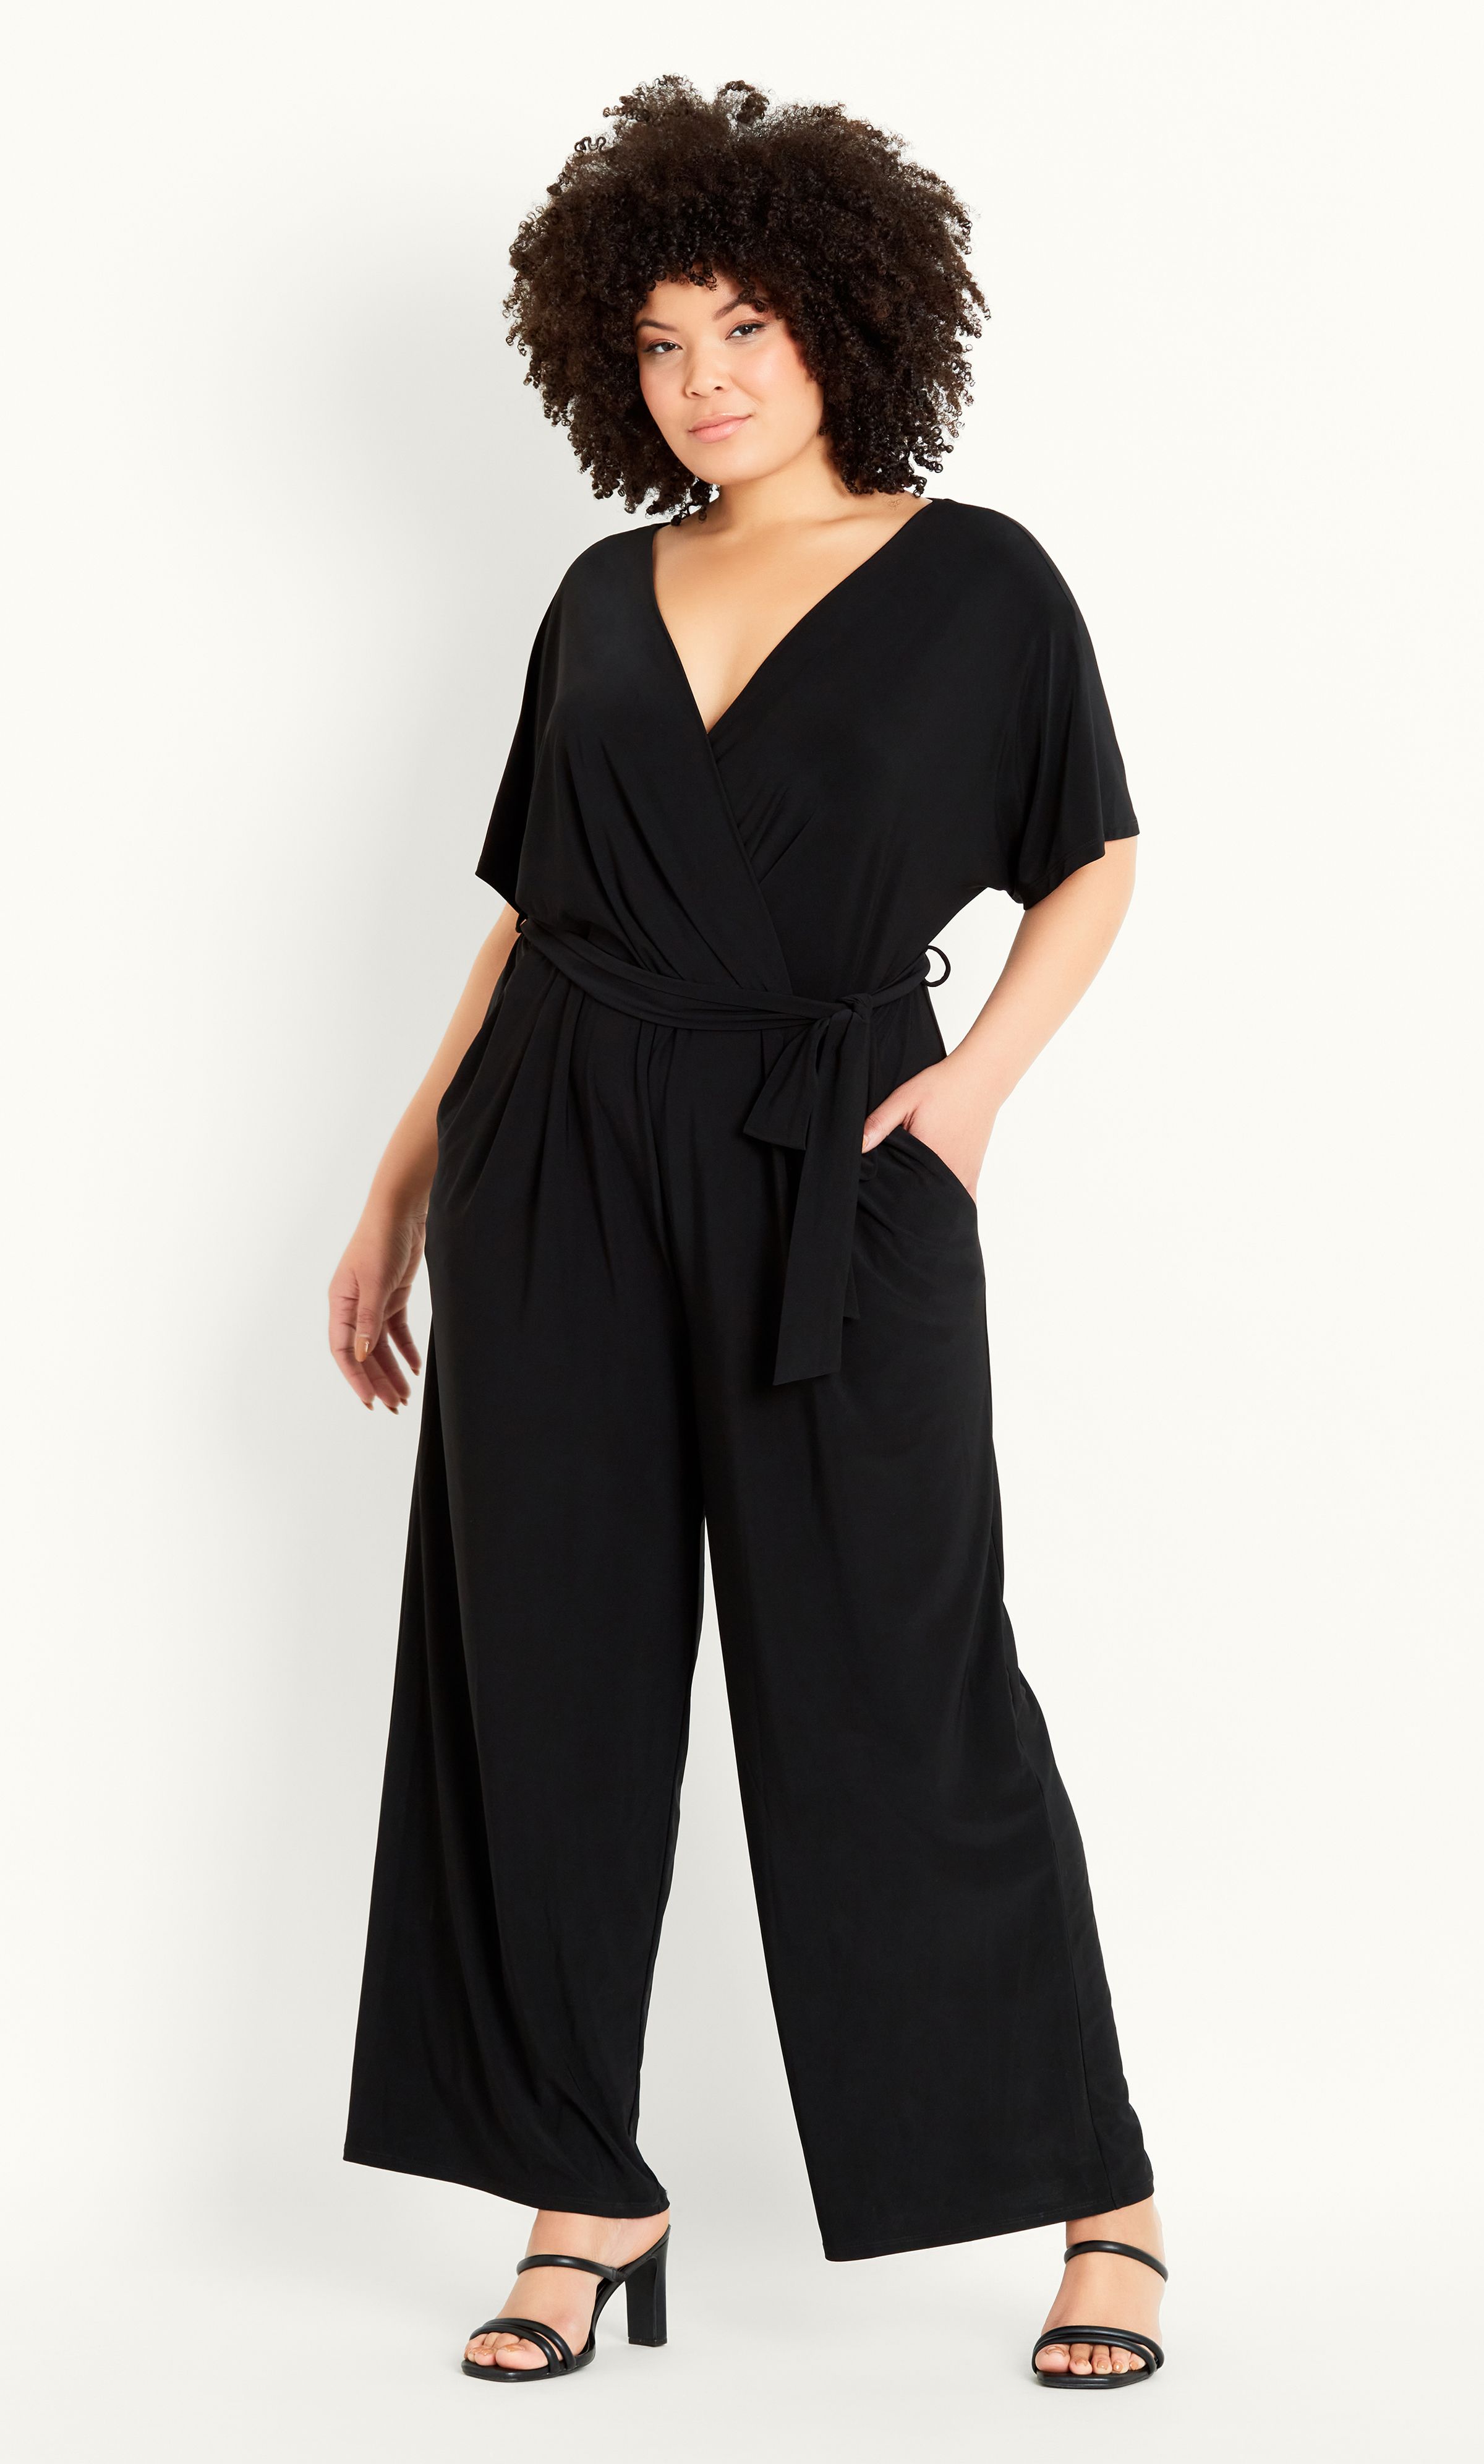 Sleek, chic and all kinds of curve-loving, the Wrap Tie Belt Jumpsuit is as flattering as it is utterly on-trend! Flirting with a plunging V-neck line and cinched waist, as well as a fashionable wide leg, this jumpsuit is a go-to when it comes to classy cocktails and after work drinks. Key Features Include: - Faux wrap V-neckline - Short sleeves - Side pockets - Elasticated waistline - Removable self-tie waist belt - Soft stretch fabrication - Relaxed leg - Unlined - Pull up style - Full length Add a touch of opulence with statement earrings, strappy stilettos and a fierce red lip.